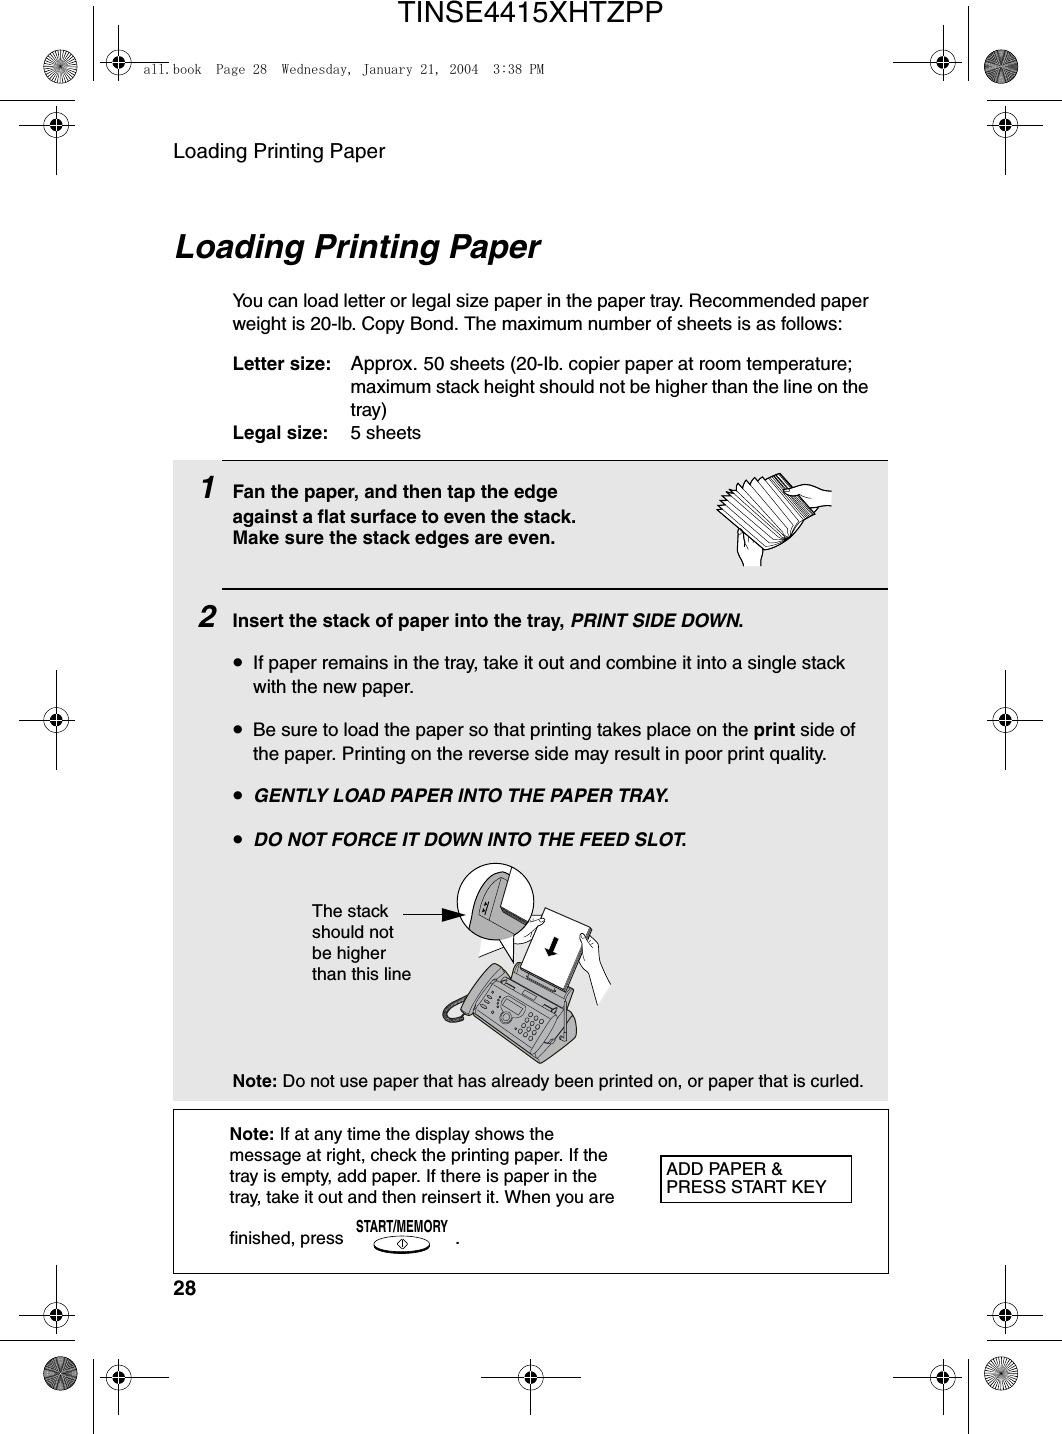 Loading Printing Paper281Fan the paper, and then tap the edge against a flat surface to even the stack. Make sure the stack edges are even.2Insert the stack of paper into the tray, PRINT SIDE DOWN.•If paper remains in the tray, take it out and combine it into a single stack with the new paper.•Be sure to load the paper so that printing takes place on the print side of the paper. Printing on the reverse side may result in poor print quality.•GENTLY LOAD PAPER INTO THE PAPER TRAY.•DO NOT FORCE IT DOWN INTO THE FEED SLOT.Note: Do not use paper that has already been printed on, or paper that is curled. Loading Printing PaperYou can load letter or legal size paper in the paper tray. Recommended paper weight is 20-lb. Copy Bond. The maximum number of sheets is as follows:Letter size: Approx. 50 sheets (20-Ib. copier paper at room temperature; maximum stack height should not be higher than the line on the tray)Legal size: 5 sheetsNote: If at any time the display shows the message at right, check the printing paper. If the tray is empty, add paper. If there is paper in the tray, take it out and then reinsert it. When you are finished, press .START/MEMORYThe stack should not be higher than this lineADD PAPER &amp;PRESS START KEYall.book  Page 28  Wednesday, January 21, 2004  3:38 PMTINSE4415XHTZPP